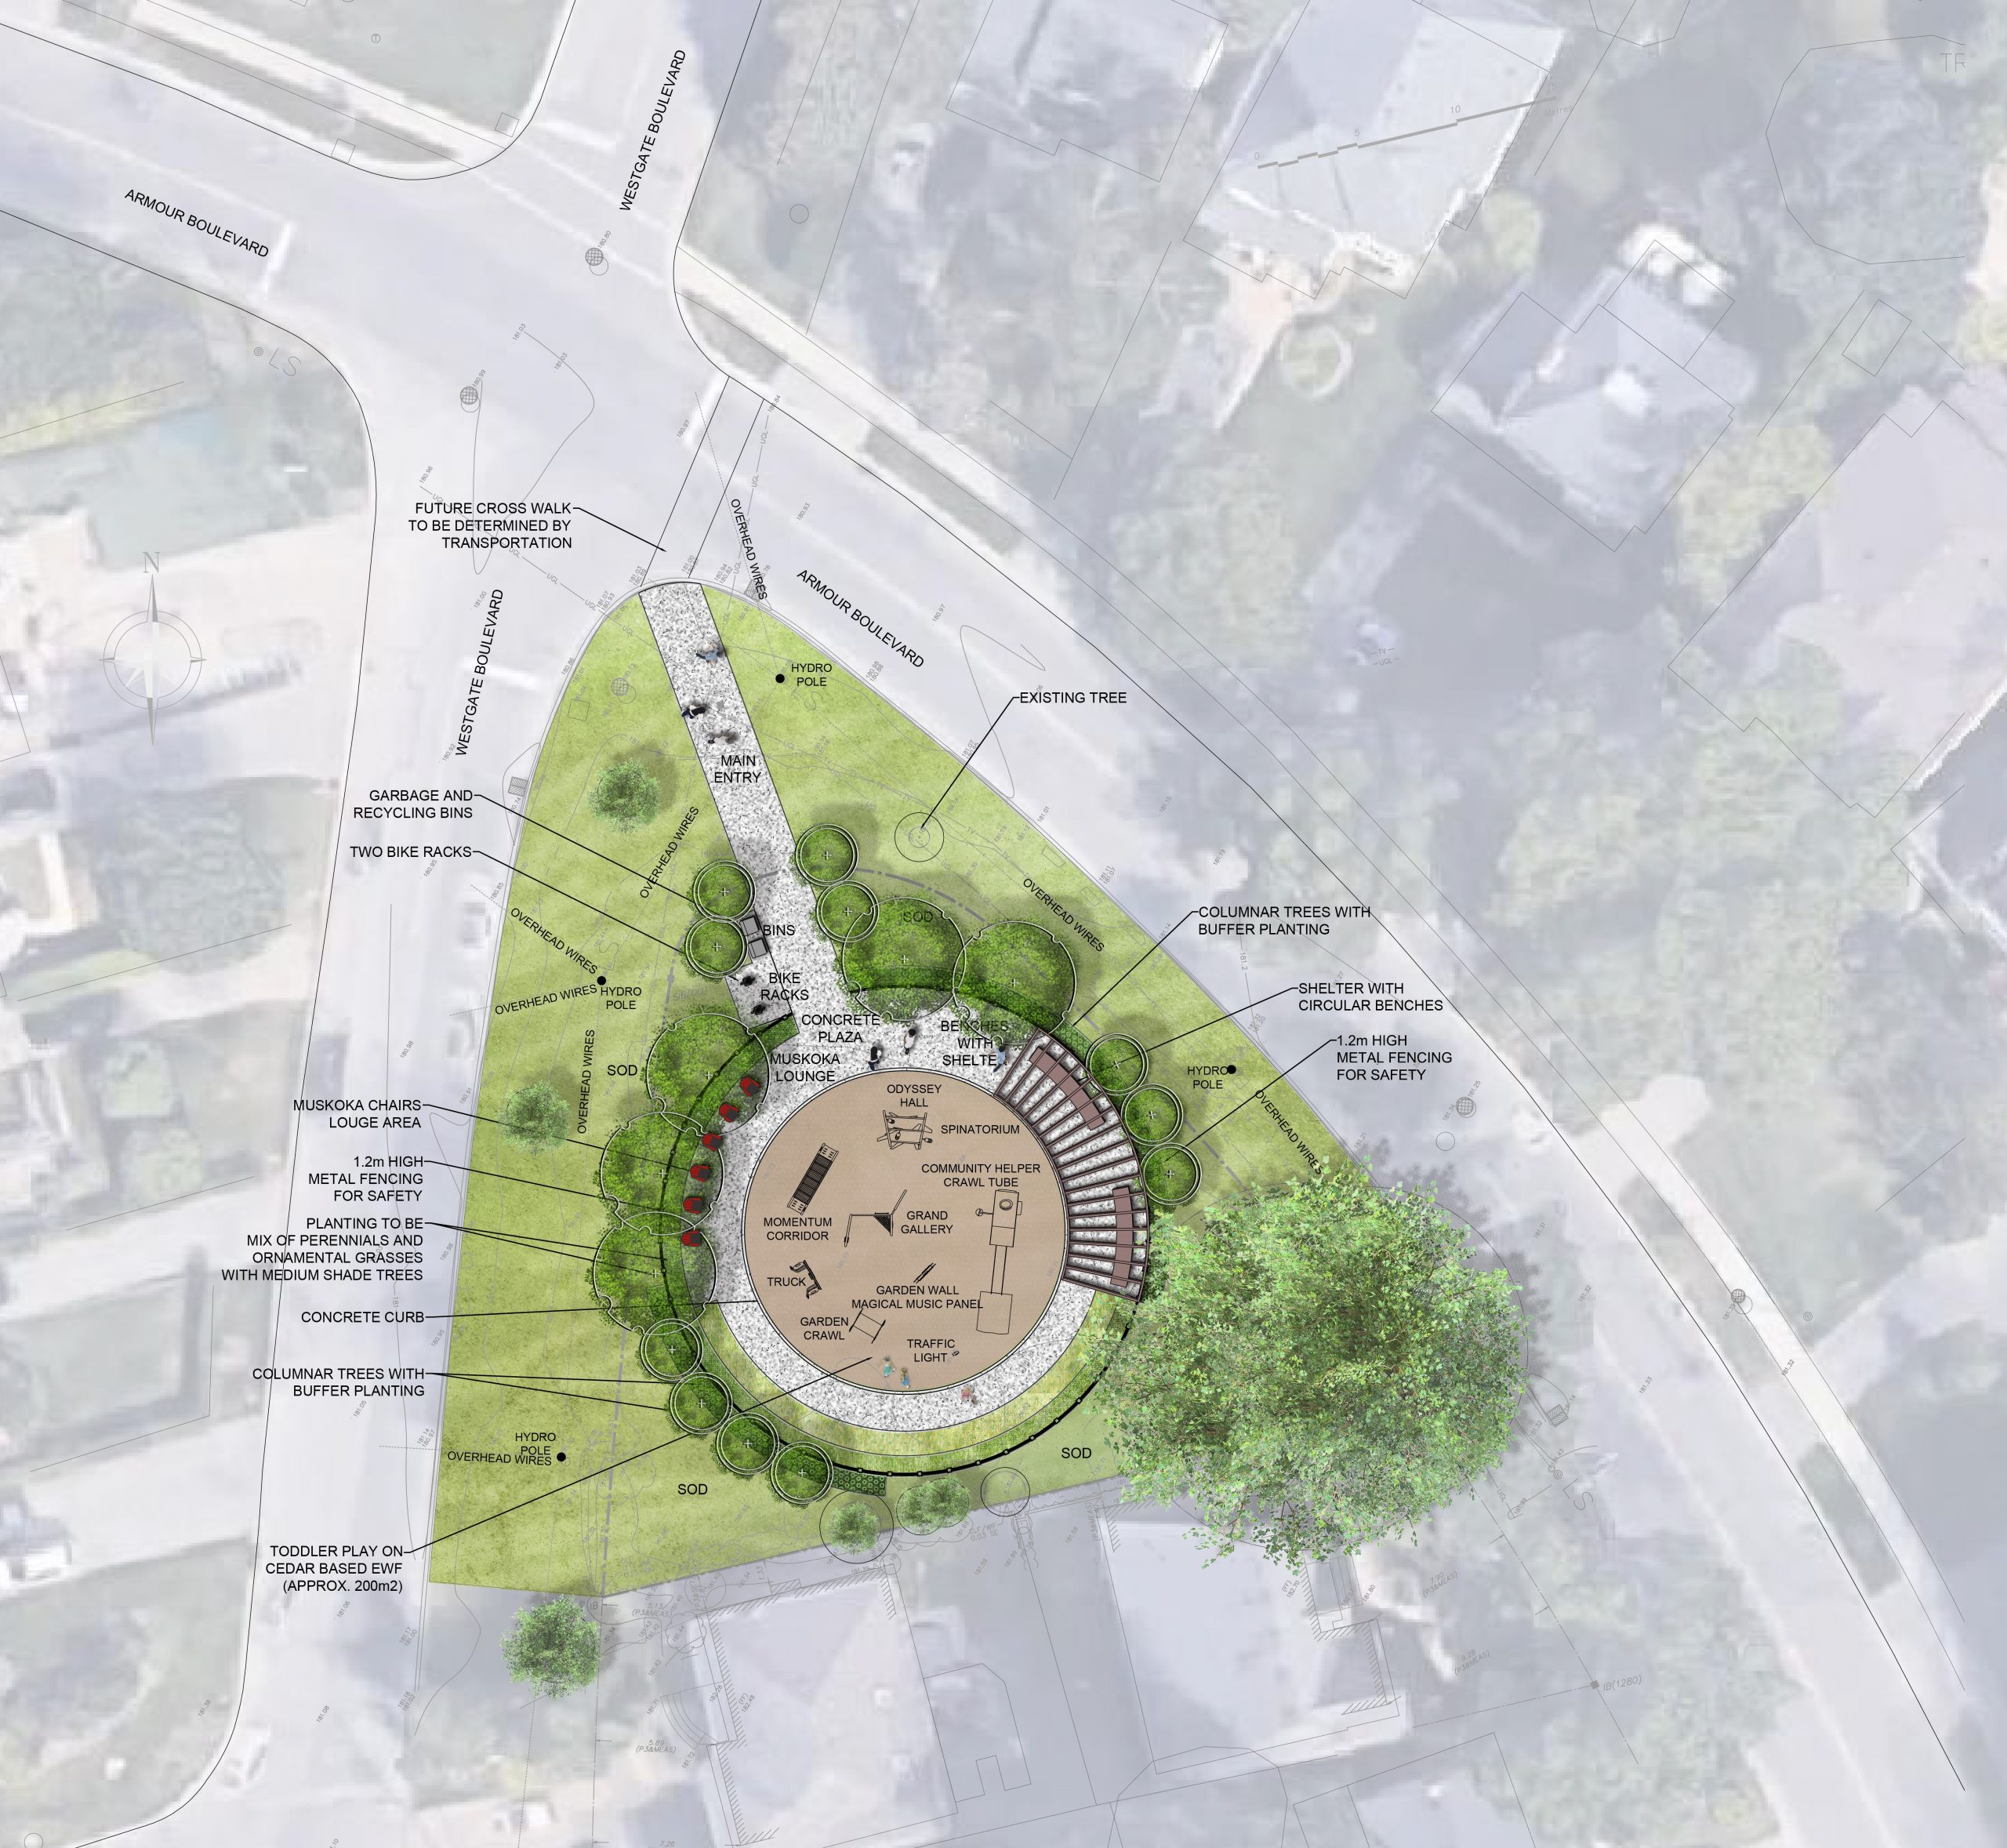  A rendering which provides a satellite view of the proposed parkette design which is circular in shape and includes various seating options, tree and ornamental plantings which surround the playground area at the center of the parkette. The main entry to the parkette is a concrete path from the corner of Westgate and Armour Boulevard and forms a circular path around the playground. 